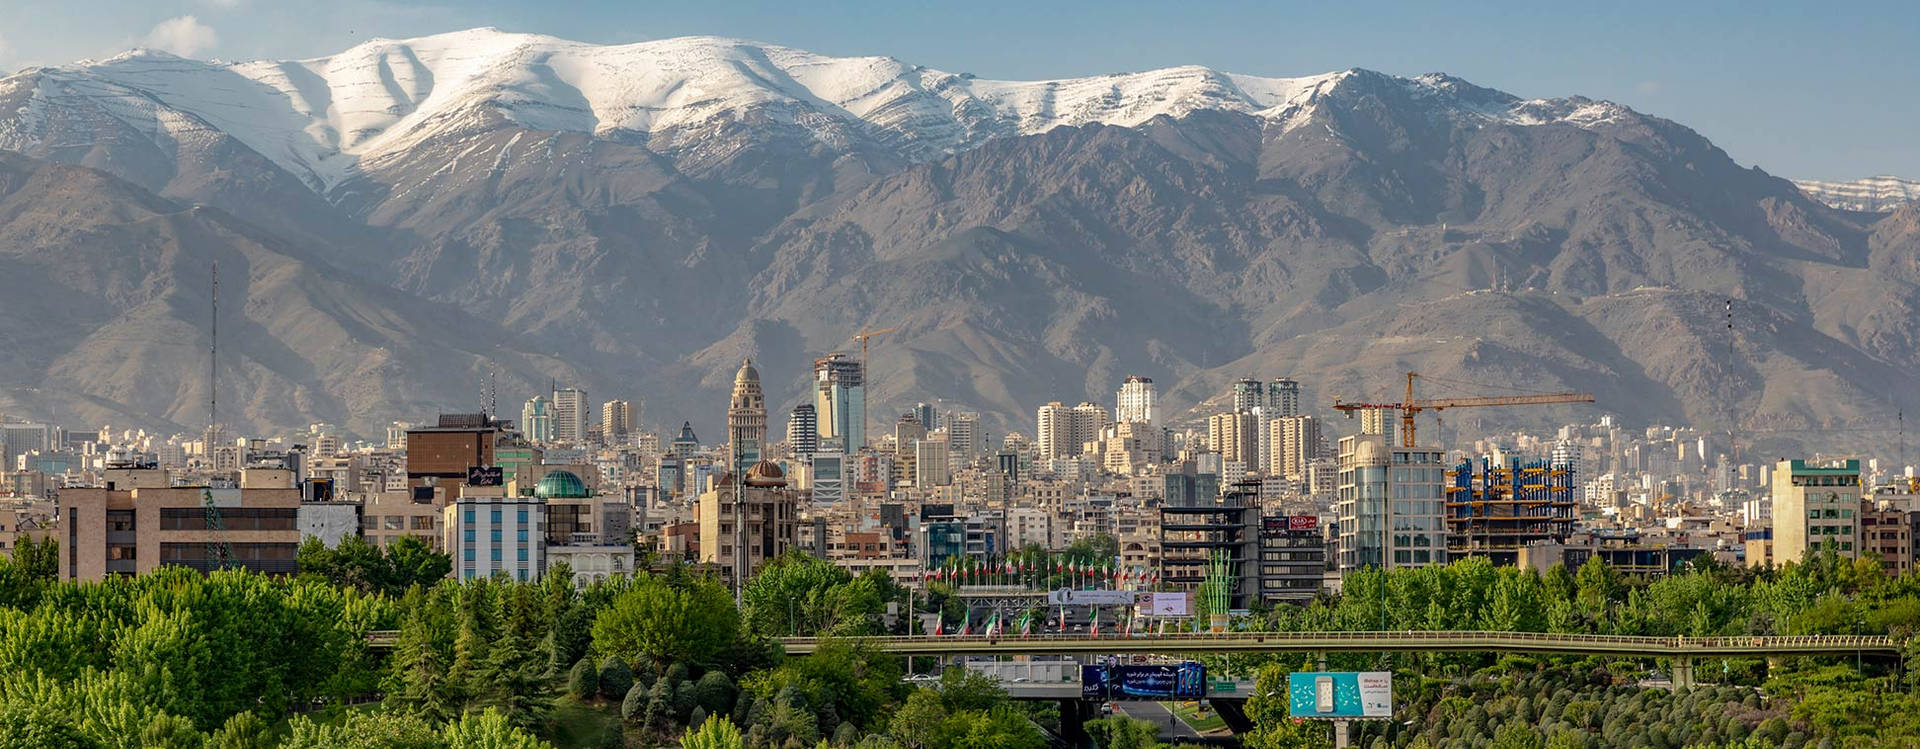 Spectacular View Of Iran City